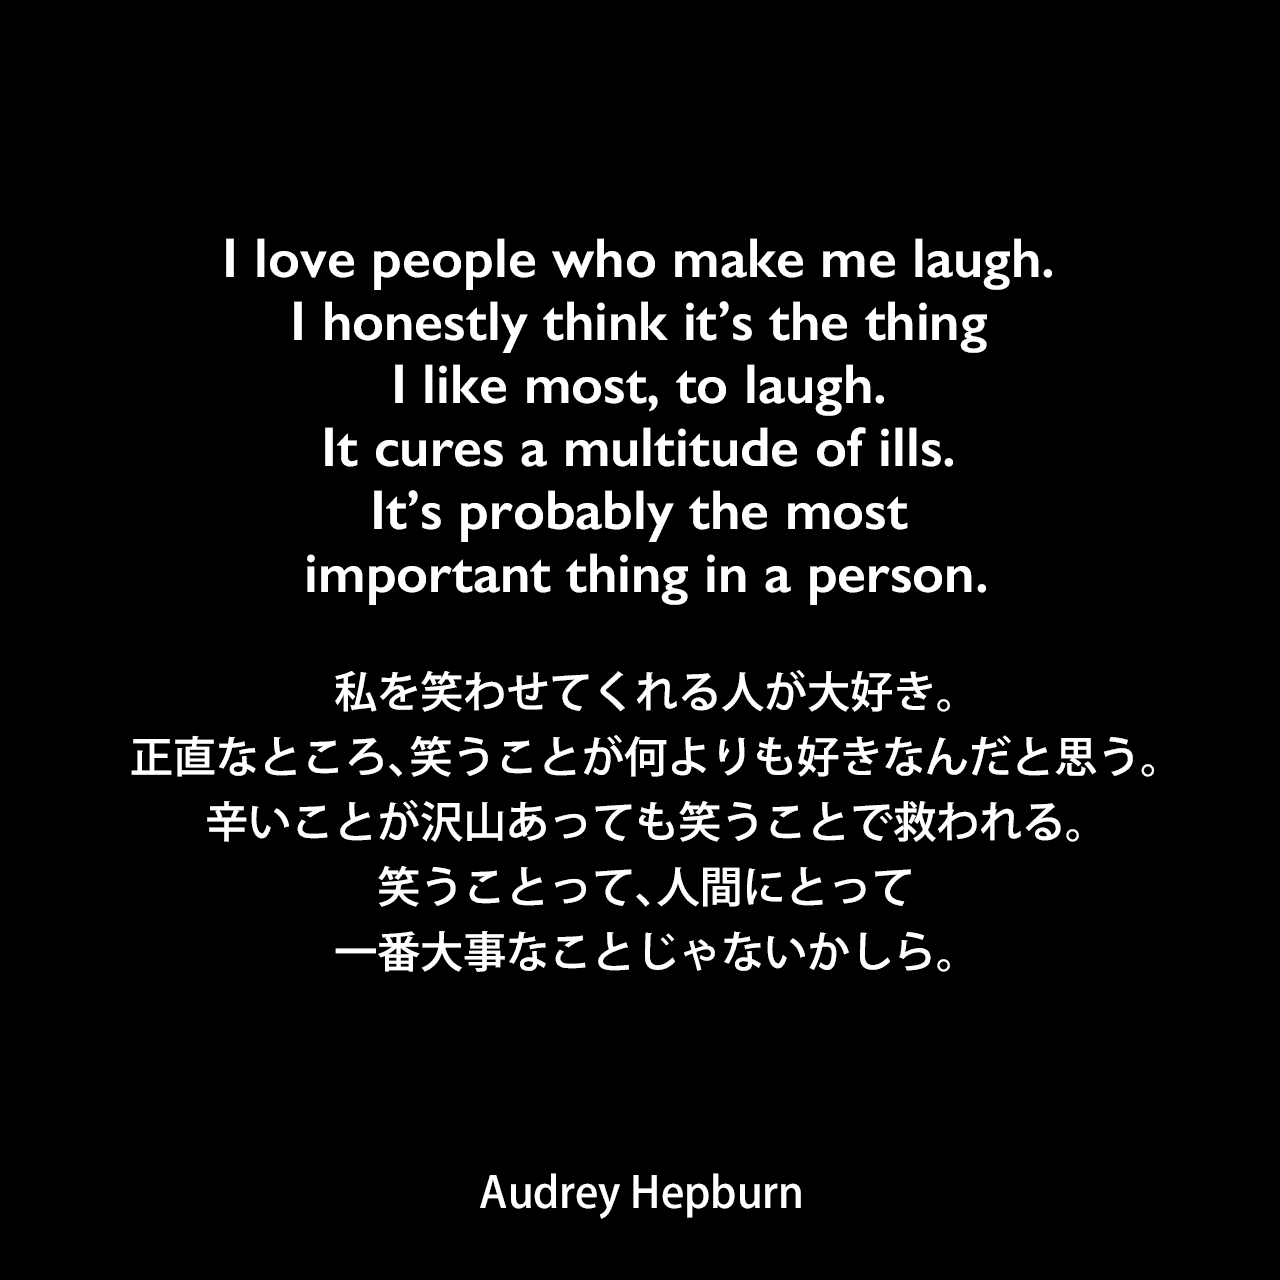 I love people who make me laugh. I honestly think it’s the thing I like most, to laugh. It cures a multitude of ills. It’s probably the most important thing in a person.私を笑わせてくれる人が大好き。正直なところ、笑うことが何よりも好きなんだと思う。辛いことが沢山あっても笑うことで救われる。笑うことって、人間にとって一番大事なことじゃないかしら。- Melissa Hellsternの本「How to be Lovely: The Audrey Hepburn Way of Life」よりAudrey Hepburn